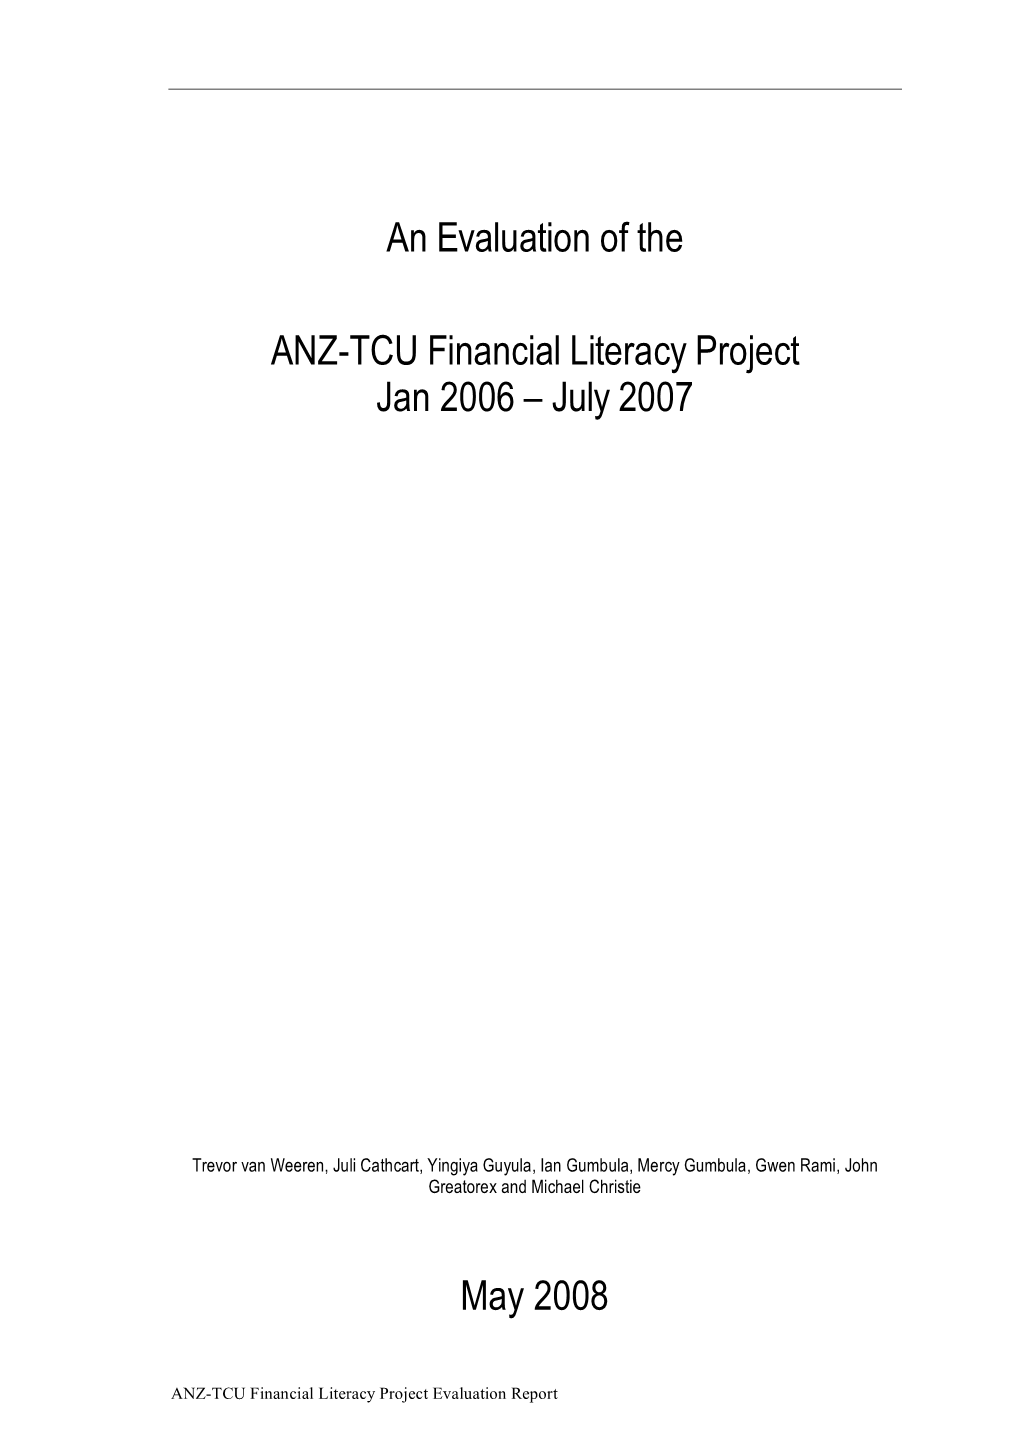 An Evaluation of the ANZ-TCU Financial Literacy Project Jan 2006